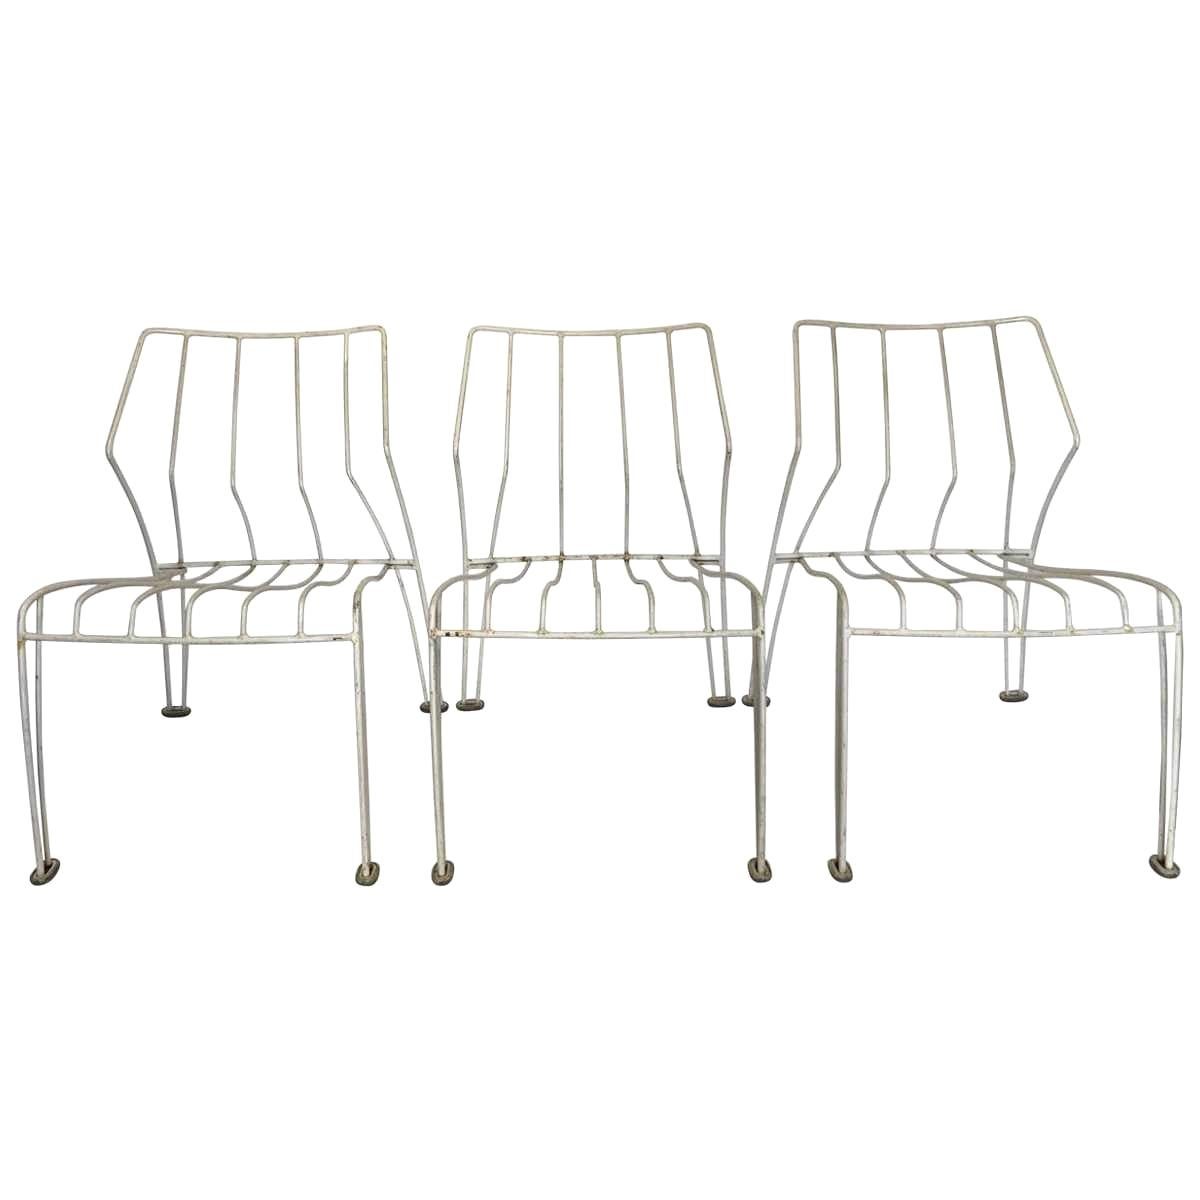 Trio of Stack-able Steel Garden Chairs, 1970-1979 For Sale